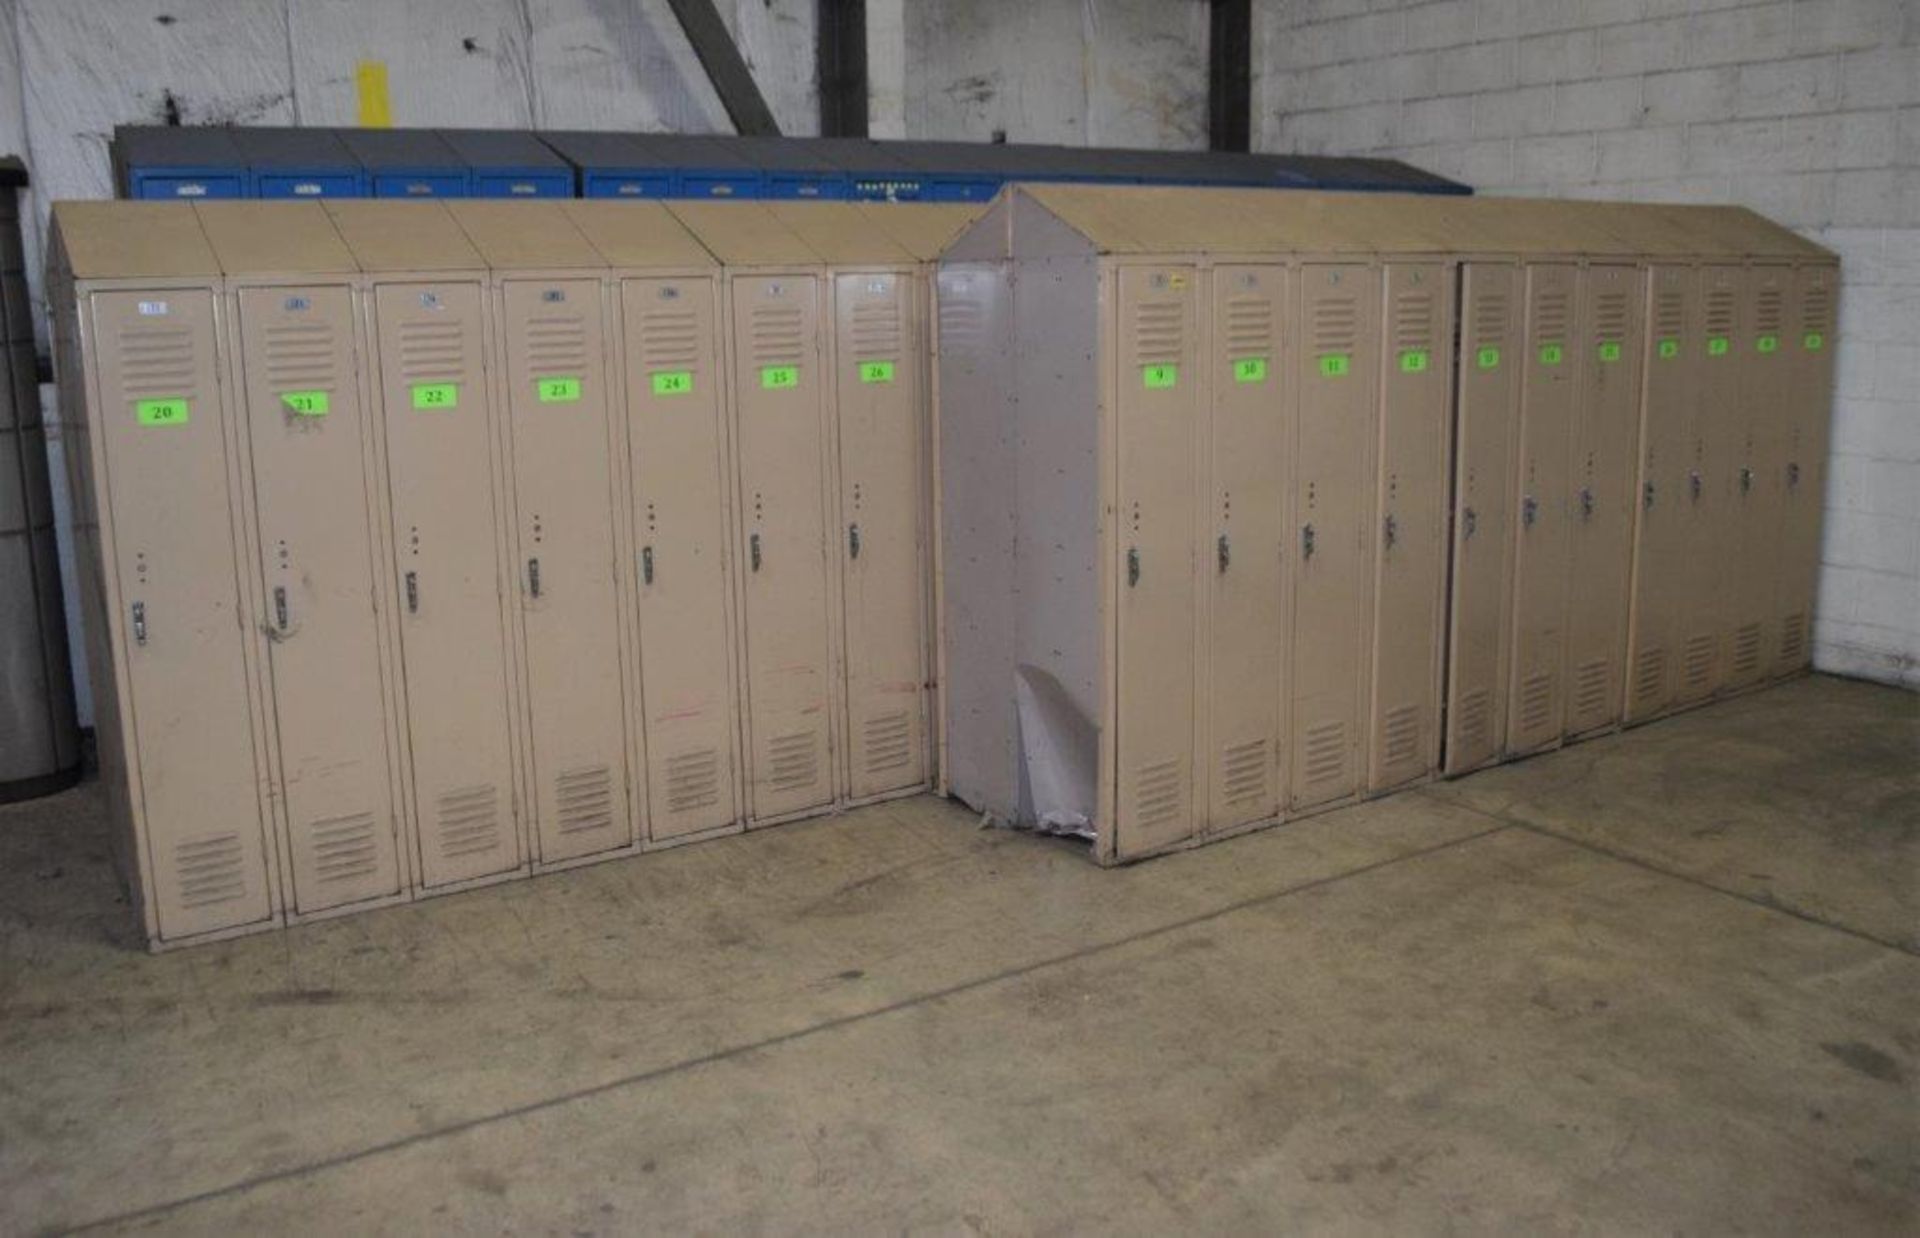 Lot of Personal employee lockers. - Image 2 of 3